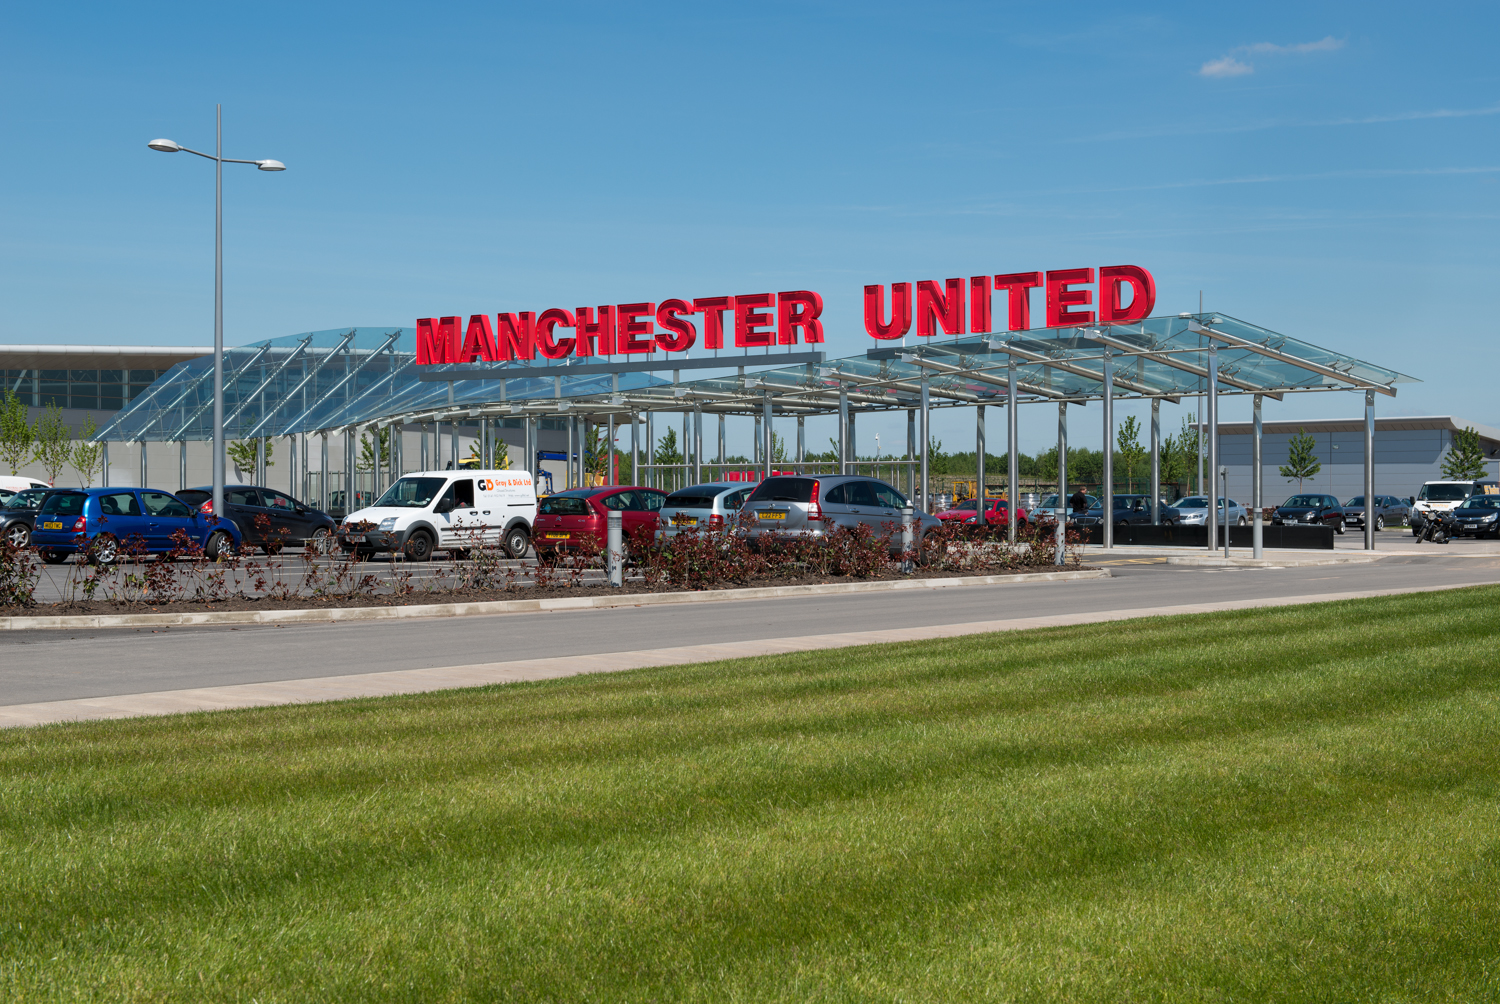 Manchester United have some renovation work going on at Carrington.